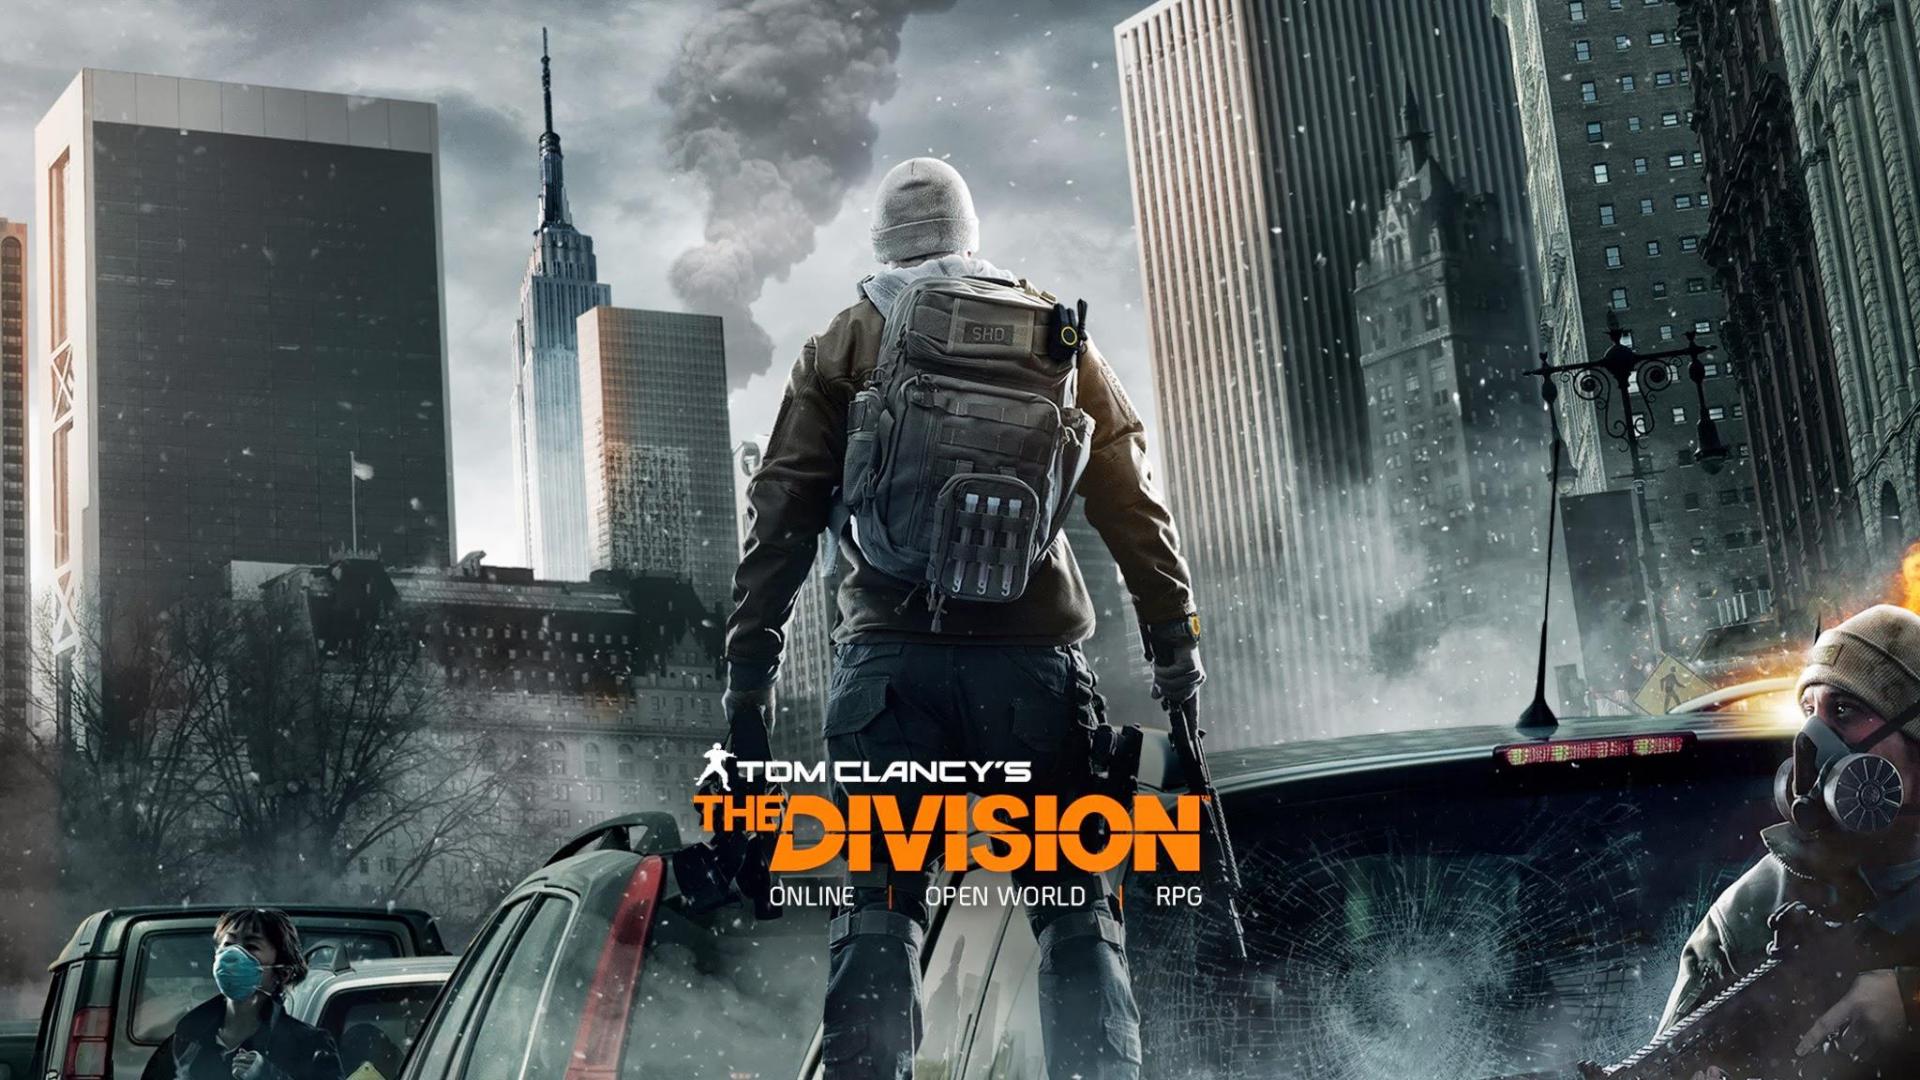 PC Glitch Abuse Plaguing “The Division” Beta - Ubisoft Attempting to Work on the Problem